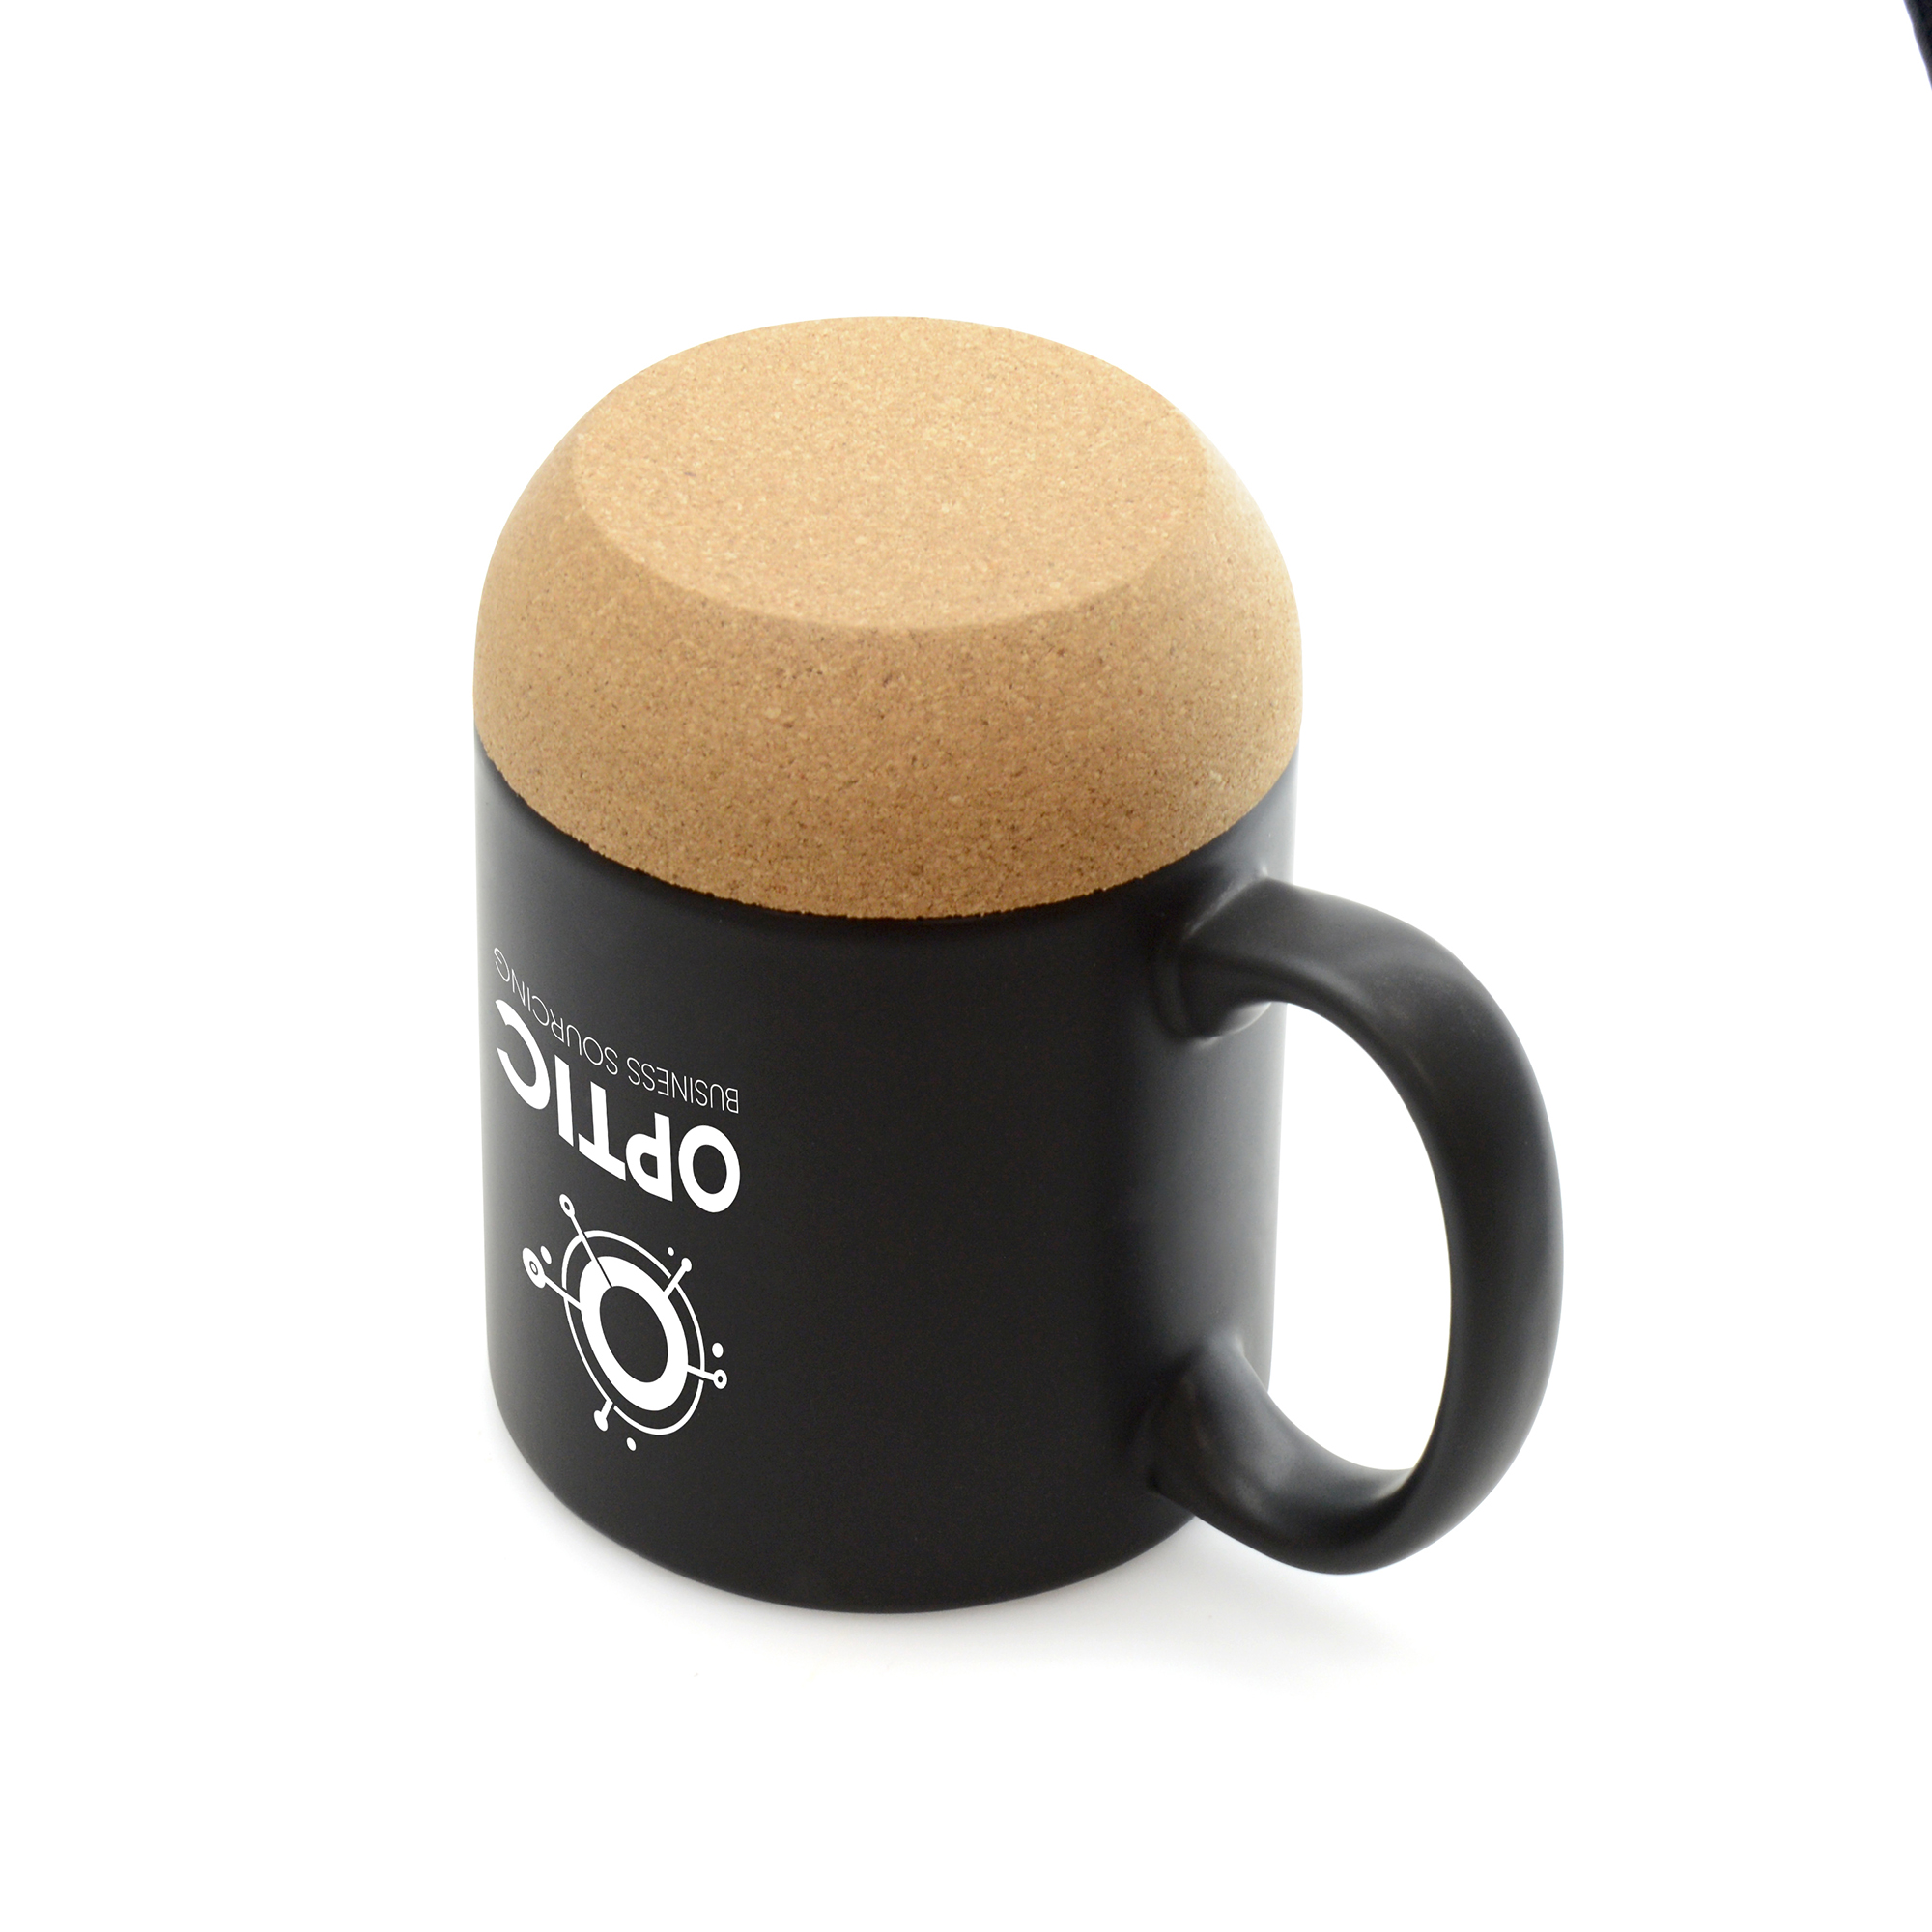 400ml matt black ceramic travel mug with a naturally insulating cork base, large handle, push-on PP lid with sliding sipper and silicone seal. BPA & PVC free.